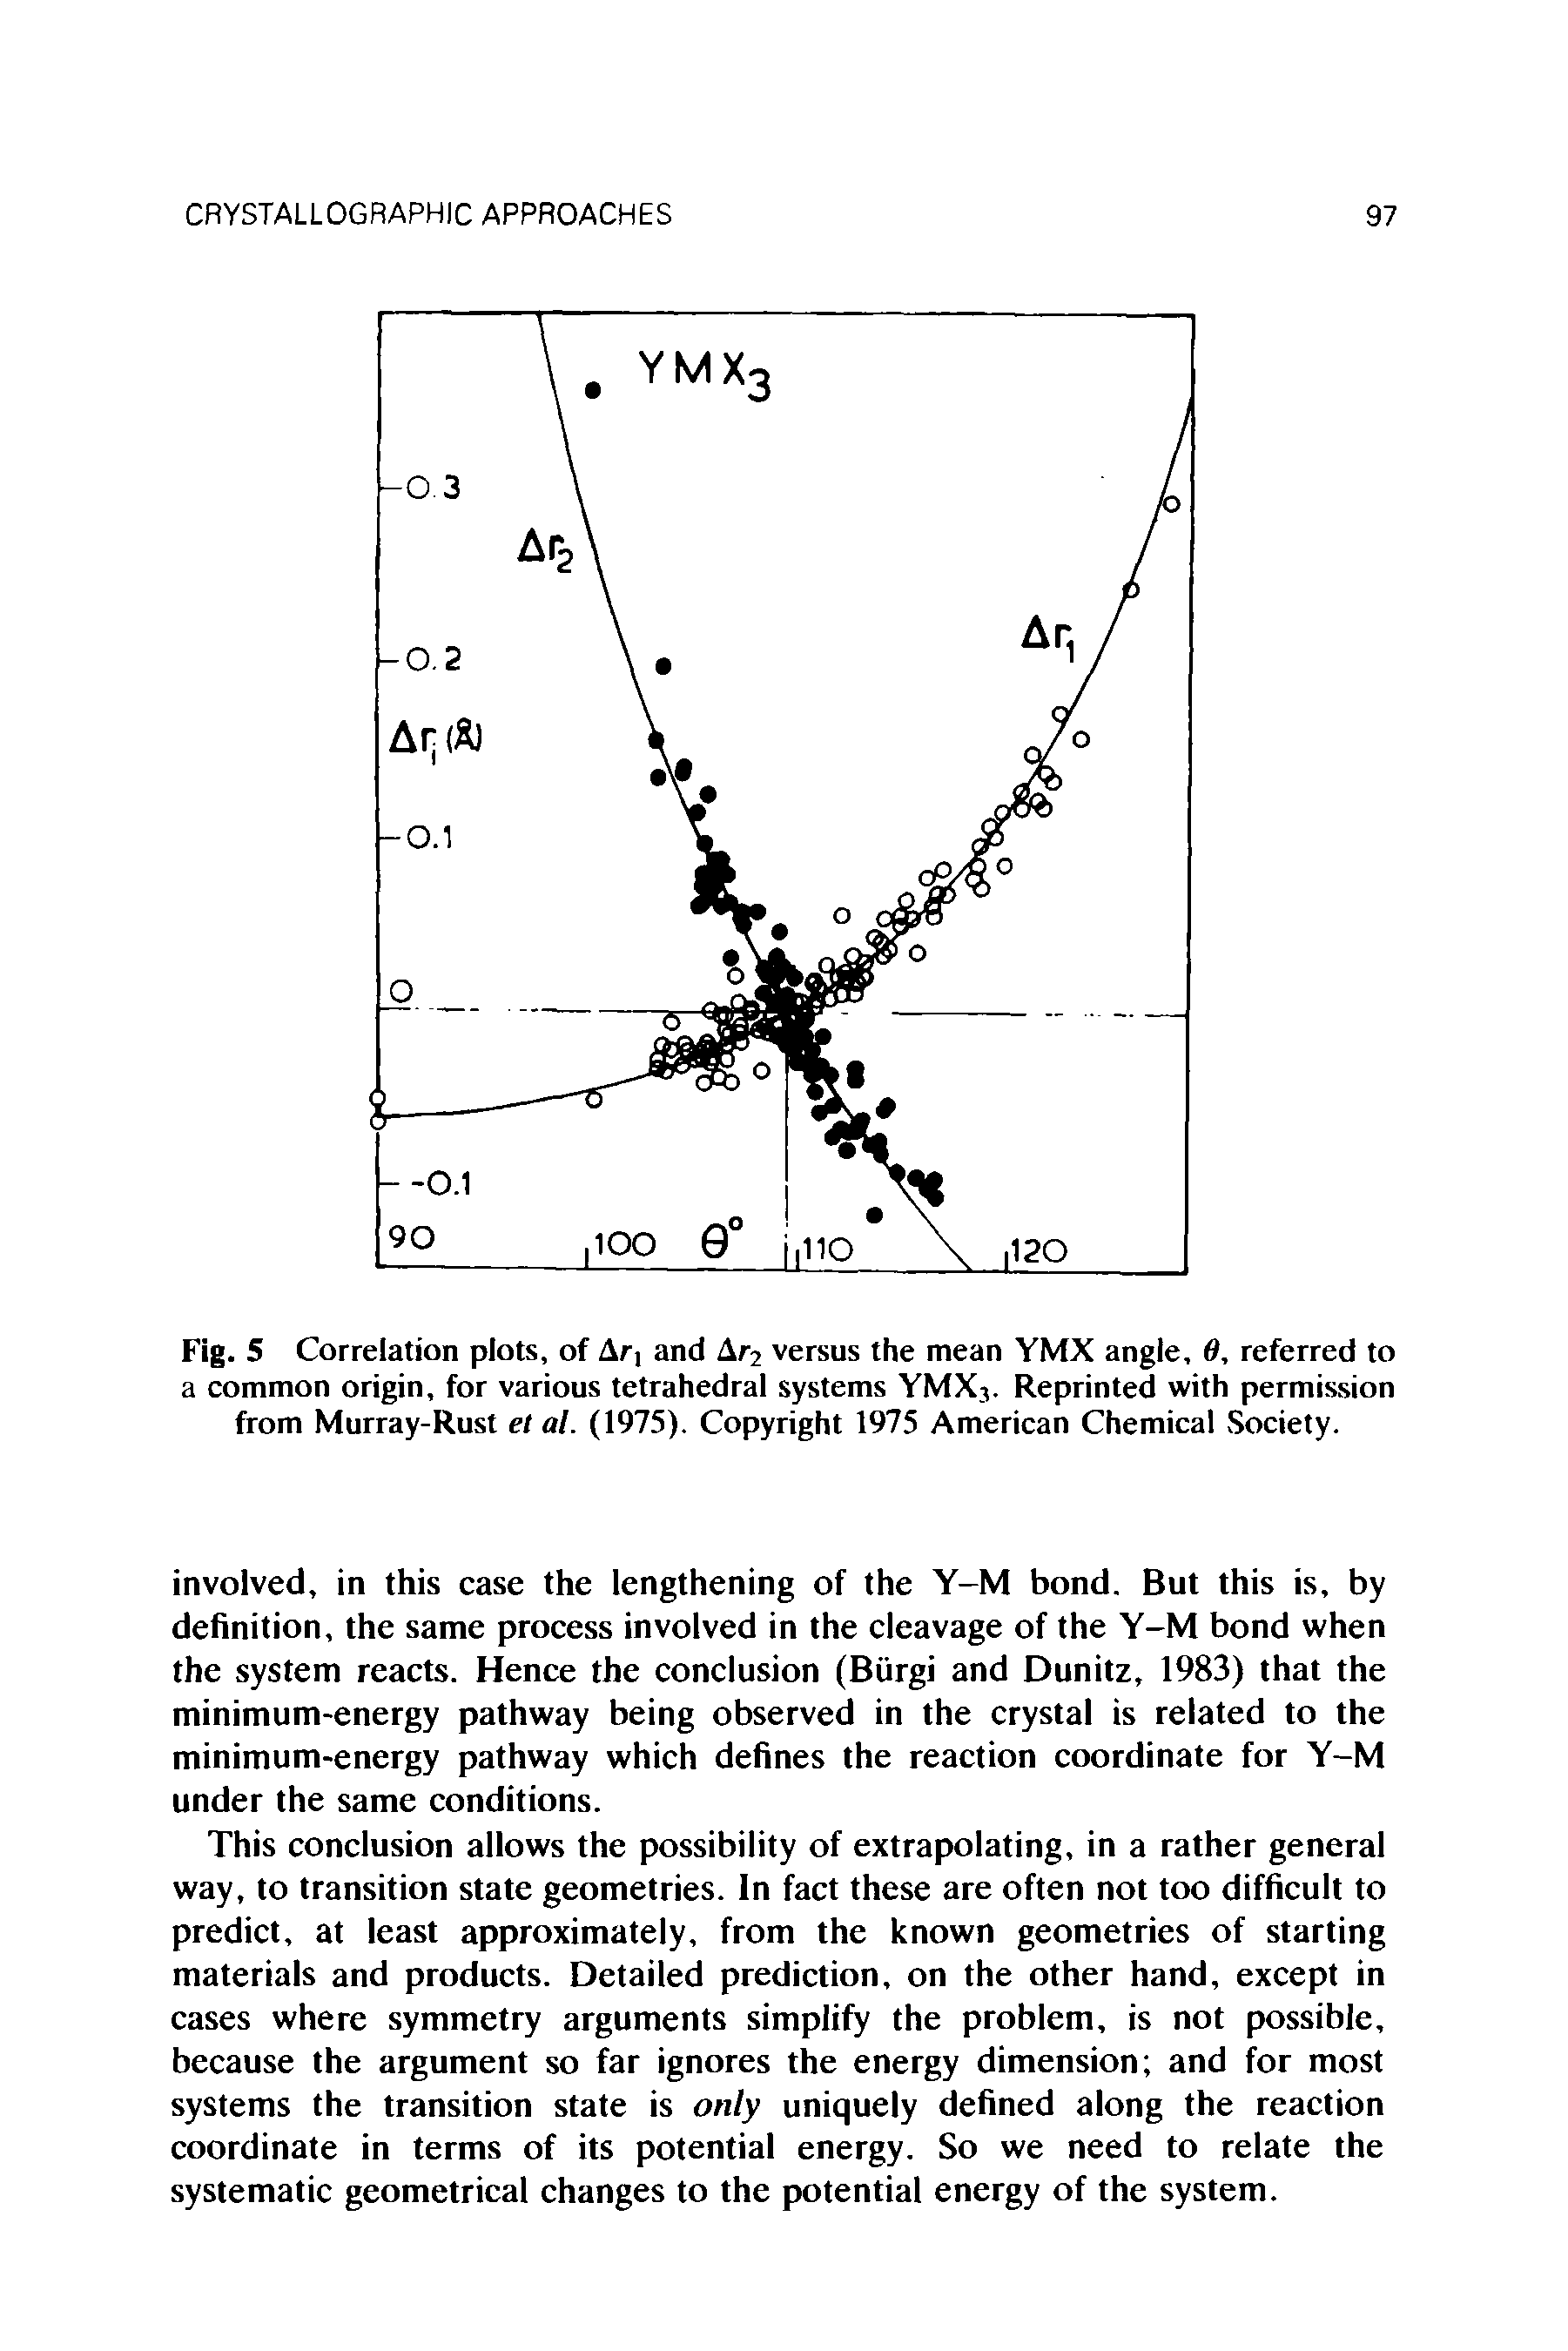 Fig. 5 Correlation plots, of Ar, and Ar2 versus the mean YMX angle, 0, referred to a common origin, for various tetrahedral systems YMXj. Reprinted with permission from Murray-Rust et al. (1975). Copyright 1975 American Chemical Society.